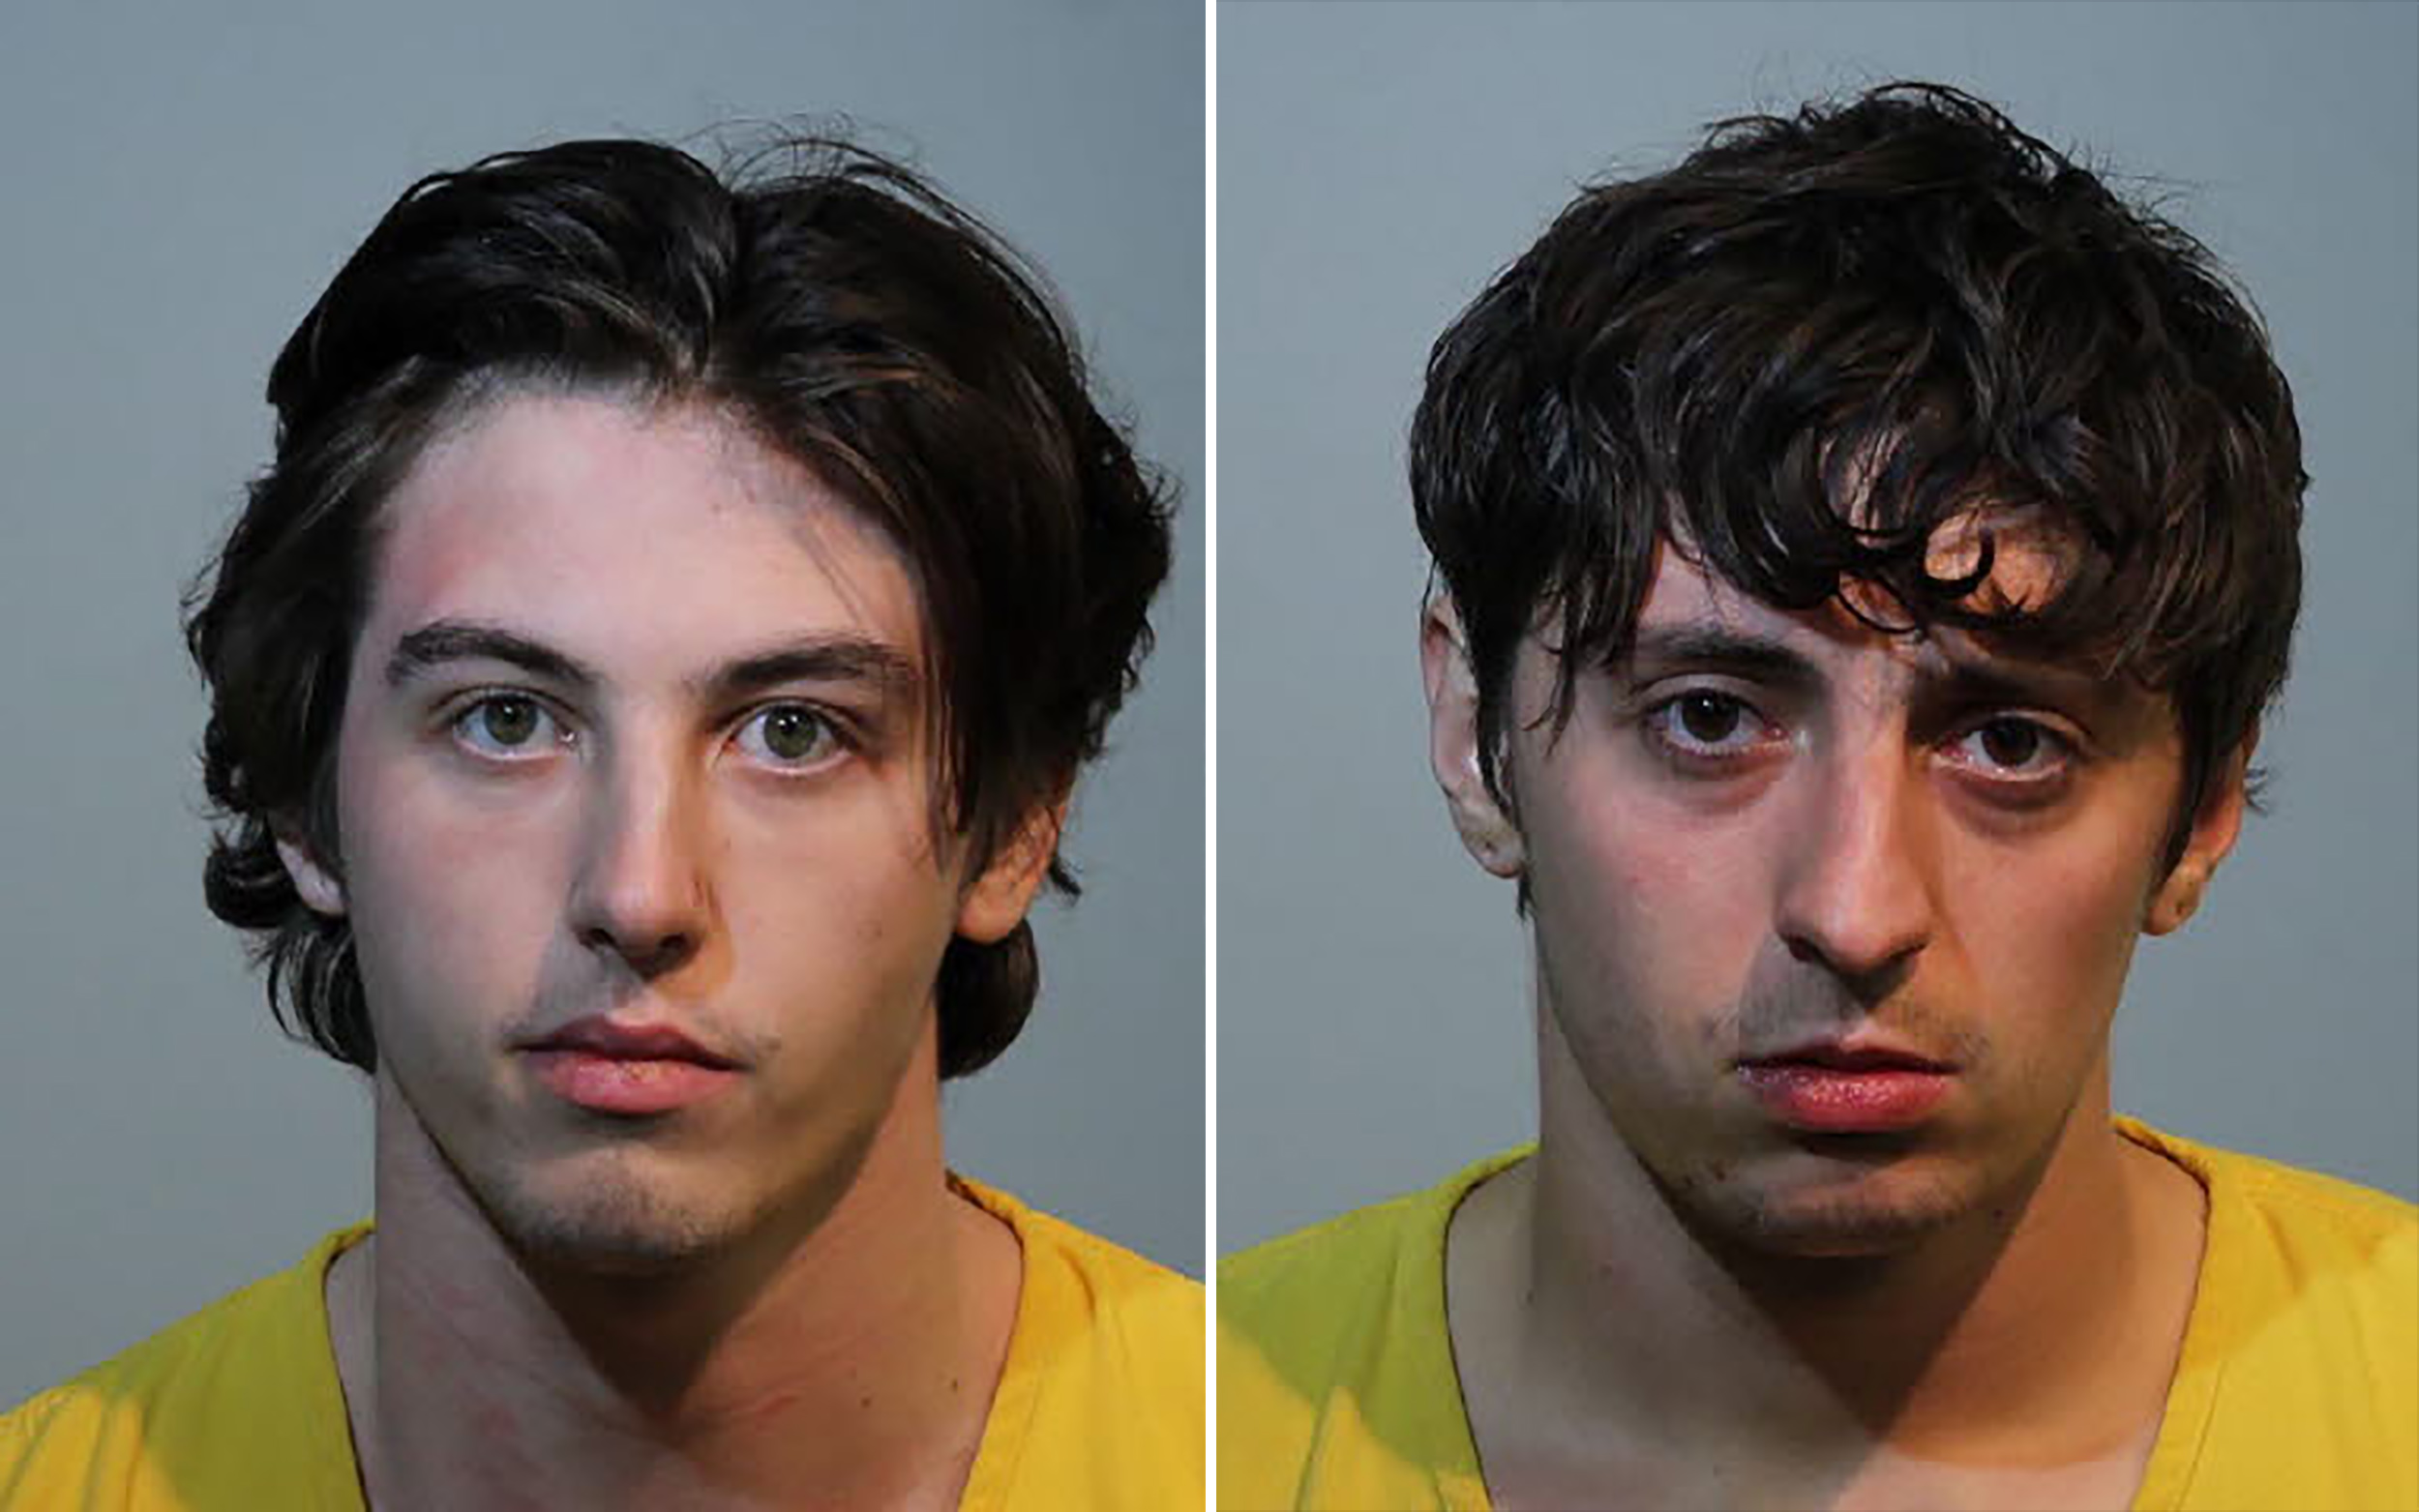 PHOTO: Ian McClurg and Jake Bilotta are pictured in undated handout photos released by the Seminole County Sheriff.